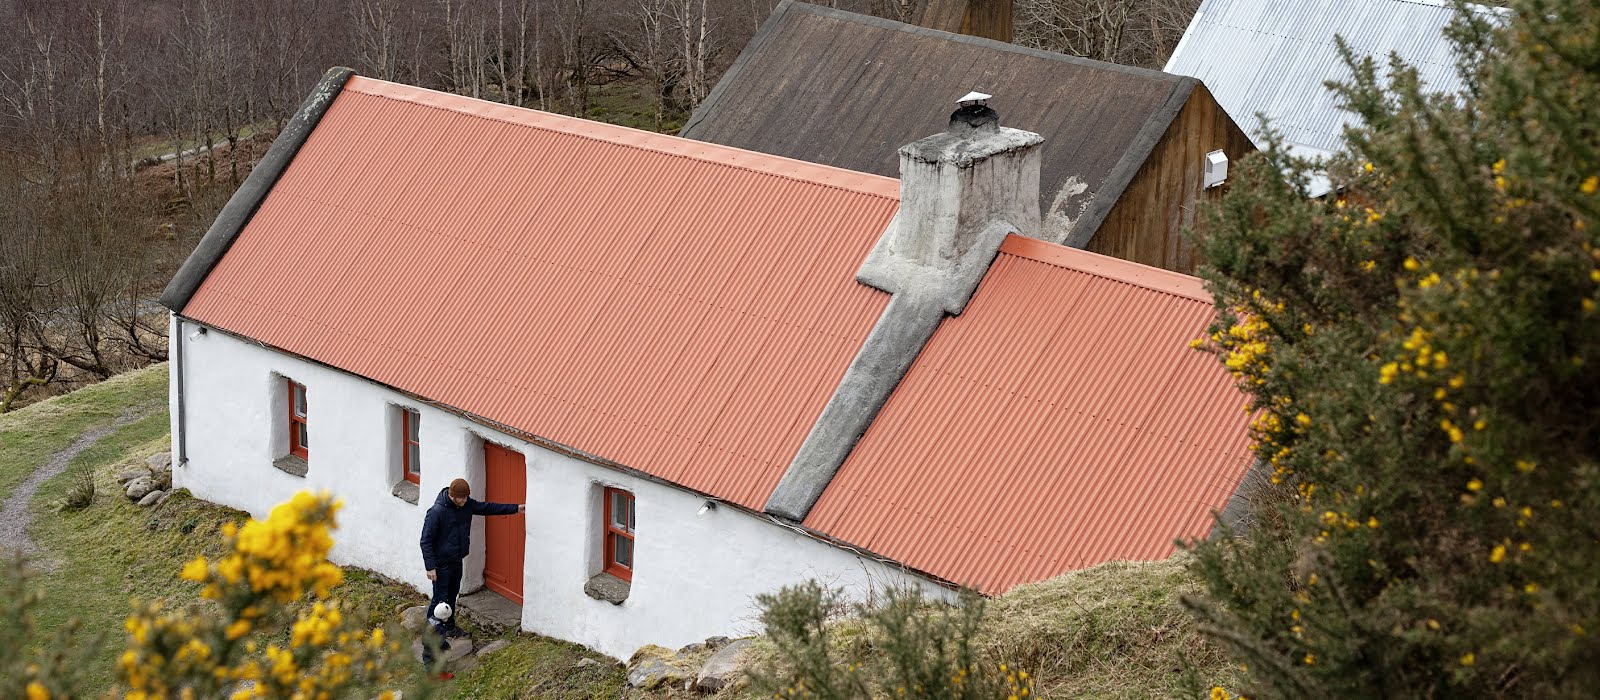 This Kerry cottage has been brought back to life, and given a jaw-dropping new addition